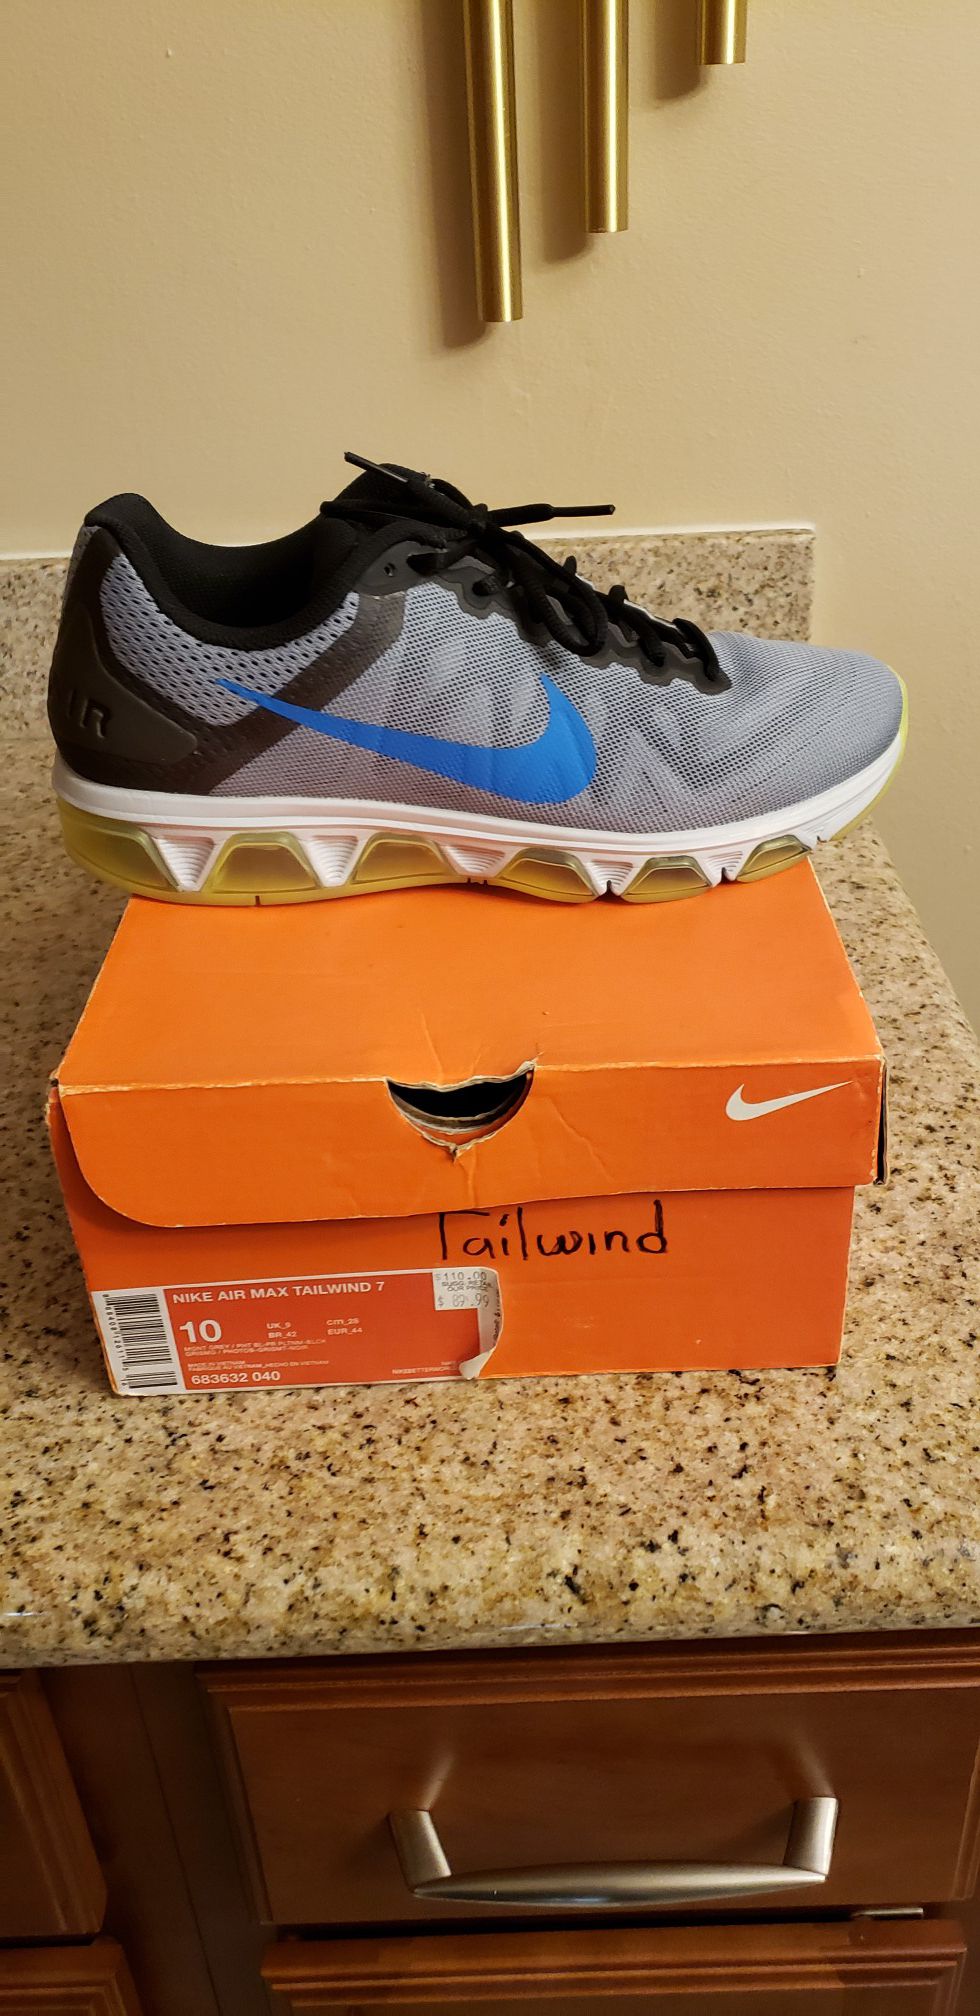 Nike air tailwind 7 for in Miami, - OfferUp